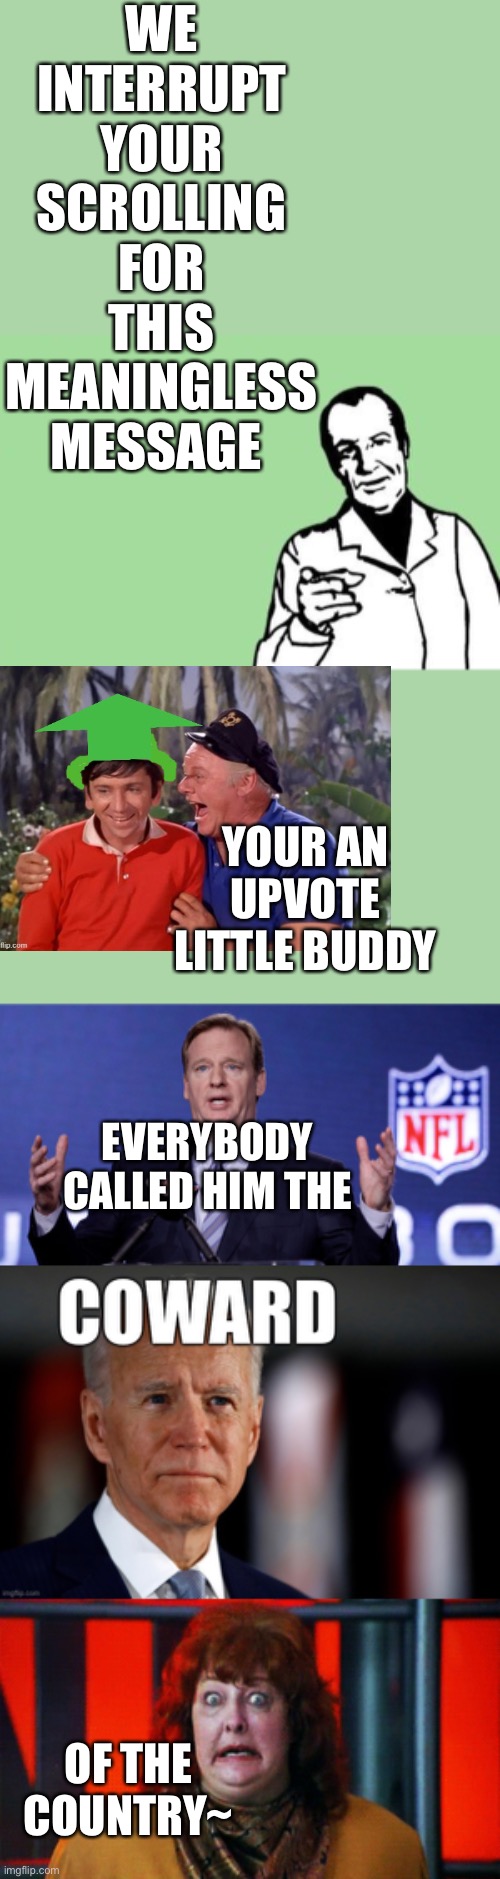 Cotus | WE INTERRUPT YOUR SCROLLING FOR THIS MEANINGLESS MESSAGE; YOUR AN UPVOTE LITTLE BUDDY; EVERYBODY CALLED HIM THE; OF THE COUNTRY~ | image tagged in blank reason,le goof of de nfl,cotus,2 weeks | made w/ Imgflip meme maker